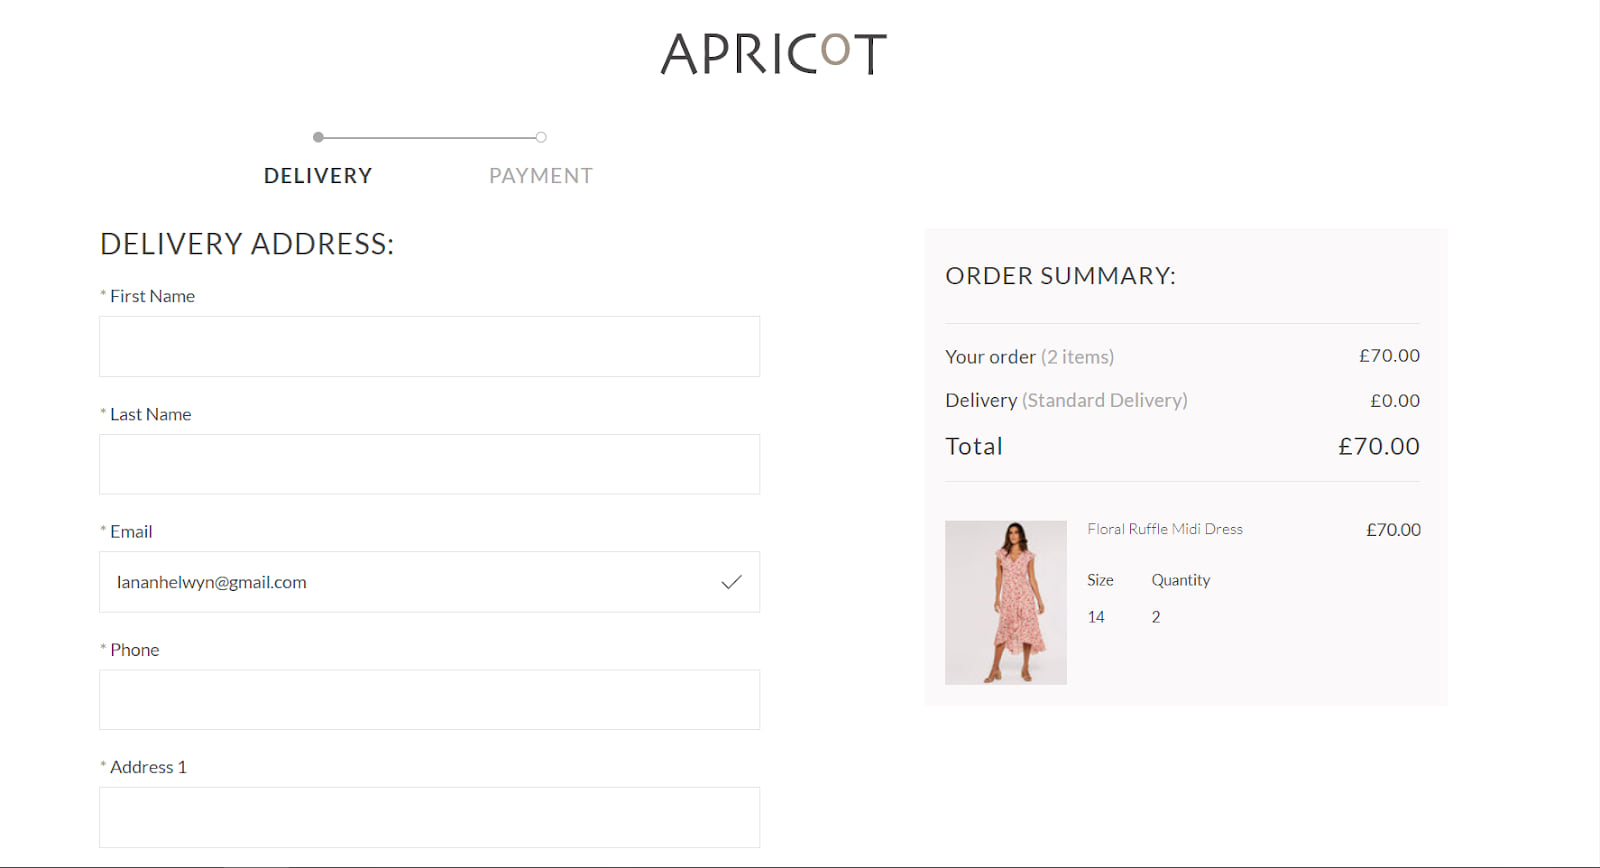 How To Use An Apricot Online Promo Code 2